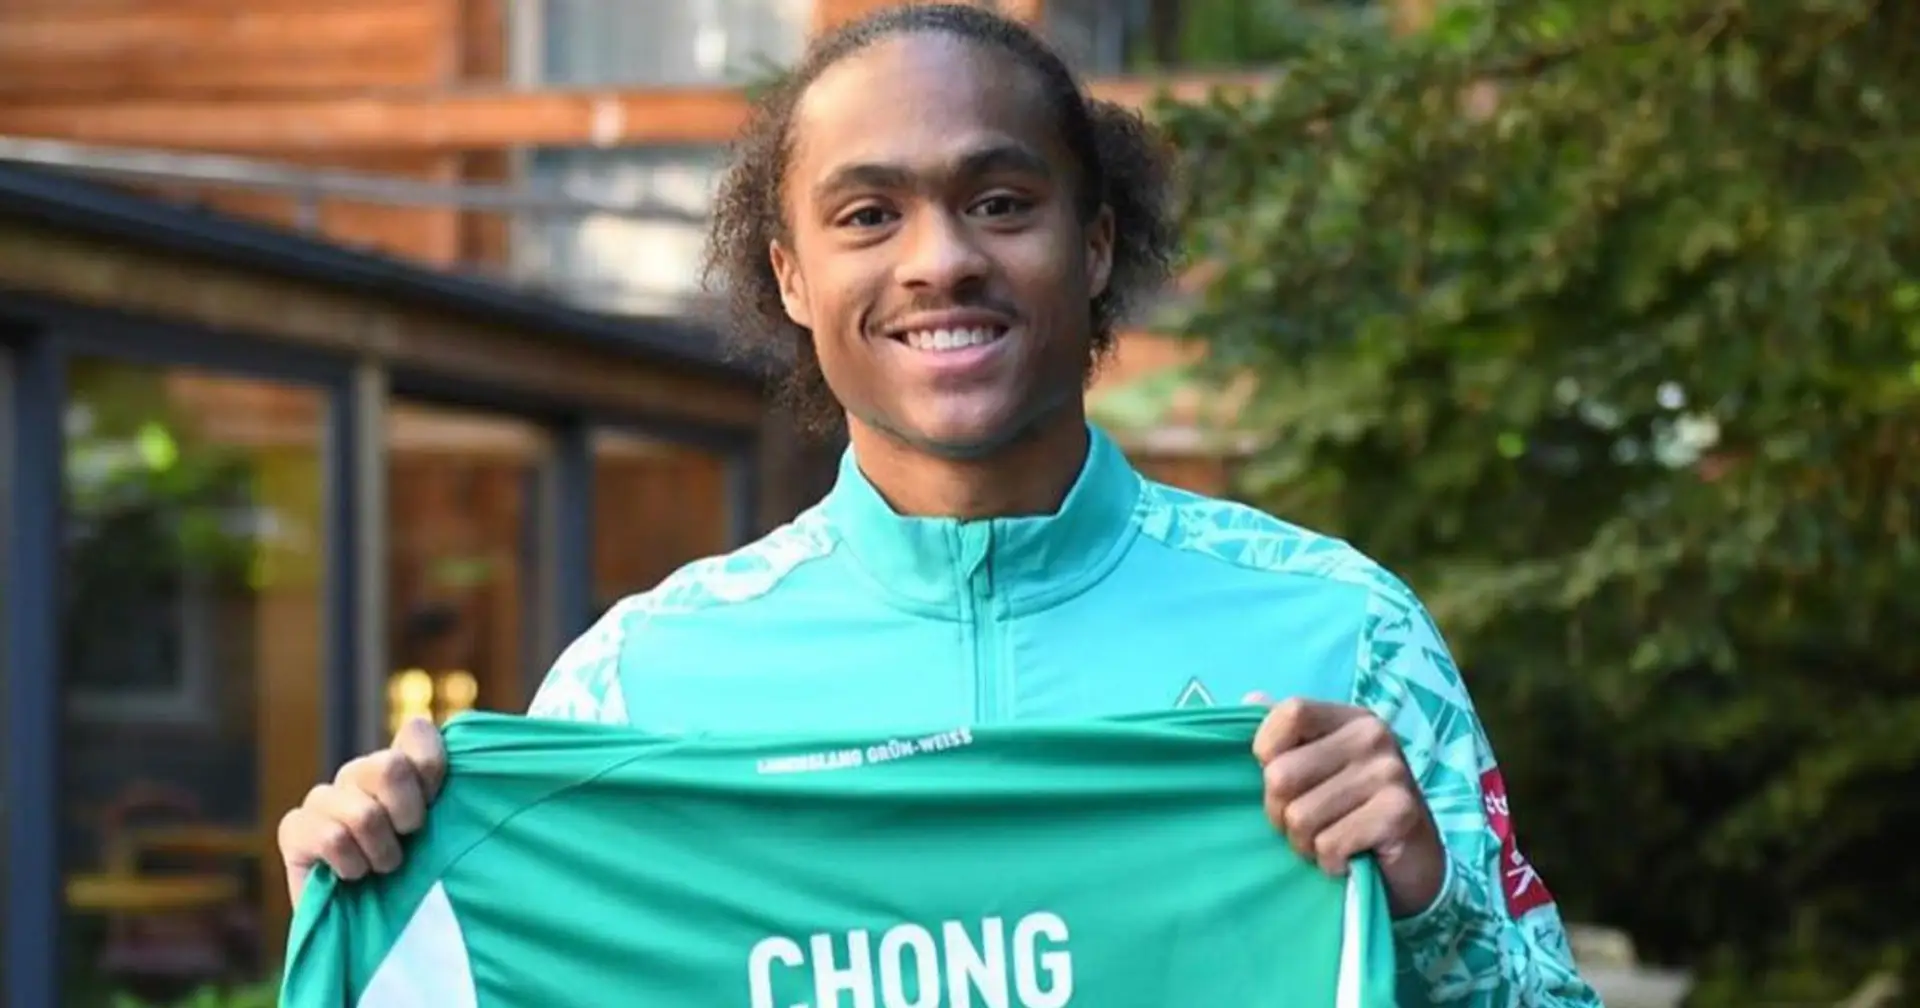 Werder Bremen boss reveals how Chong will be used during loan spell